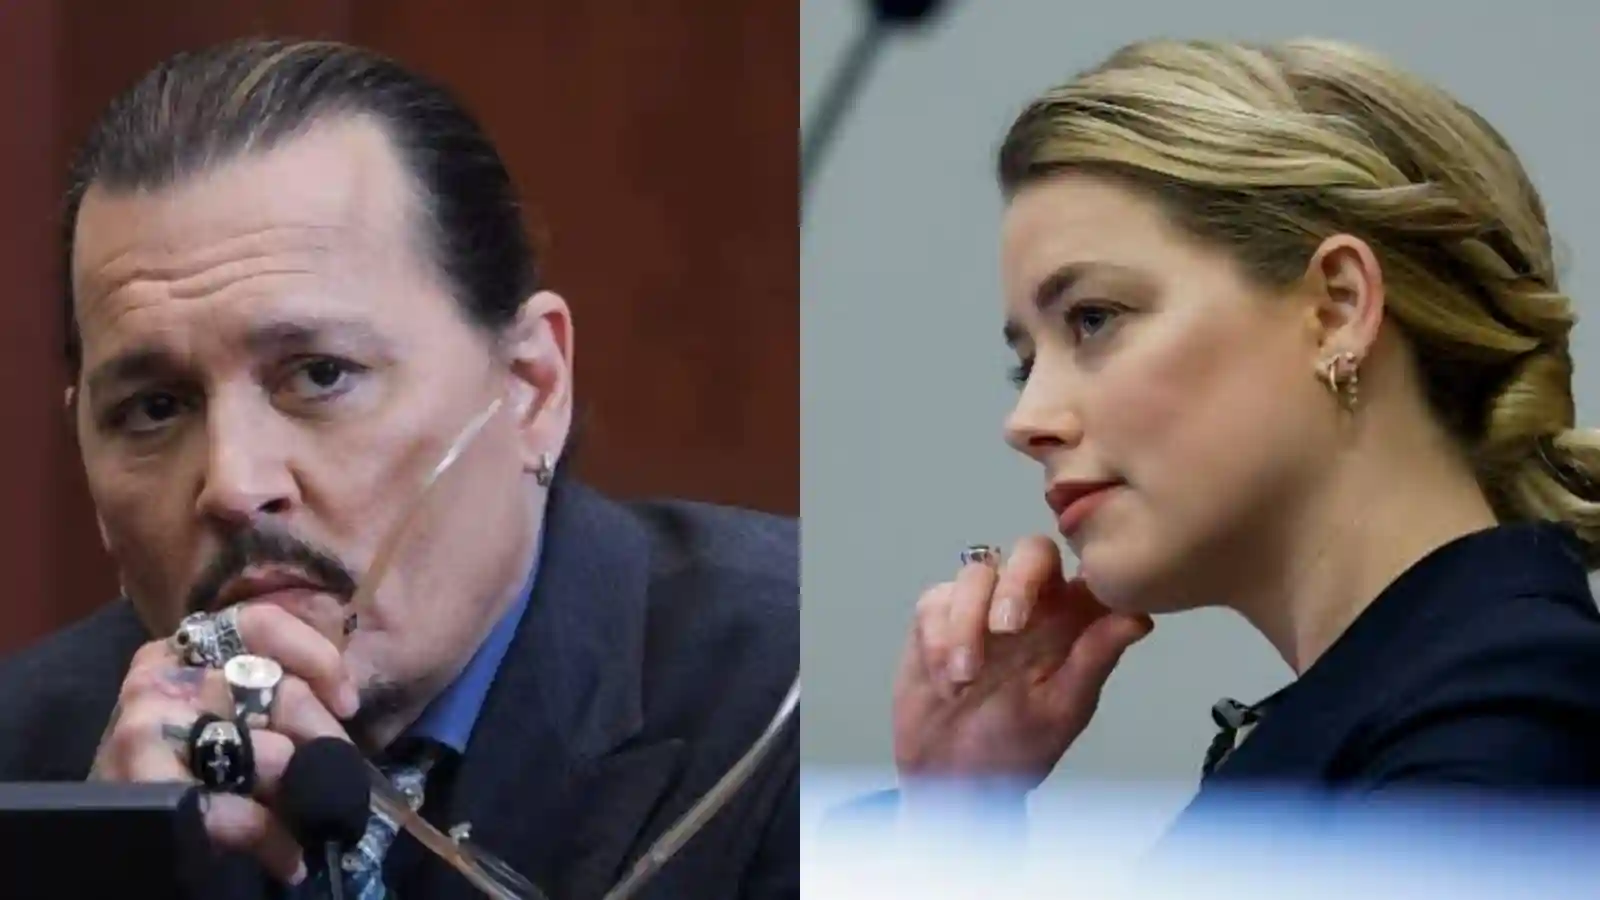 Johnny Depp and Amber Heard will settle the defamation case